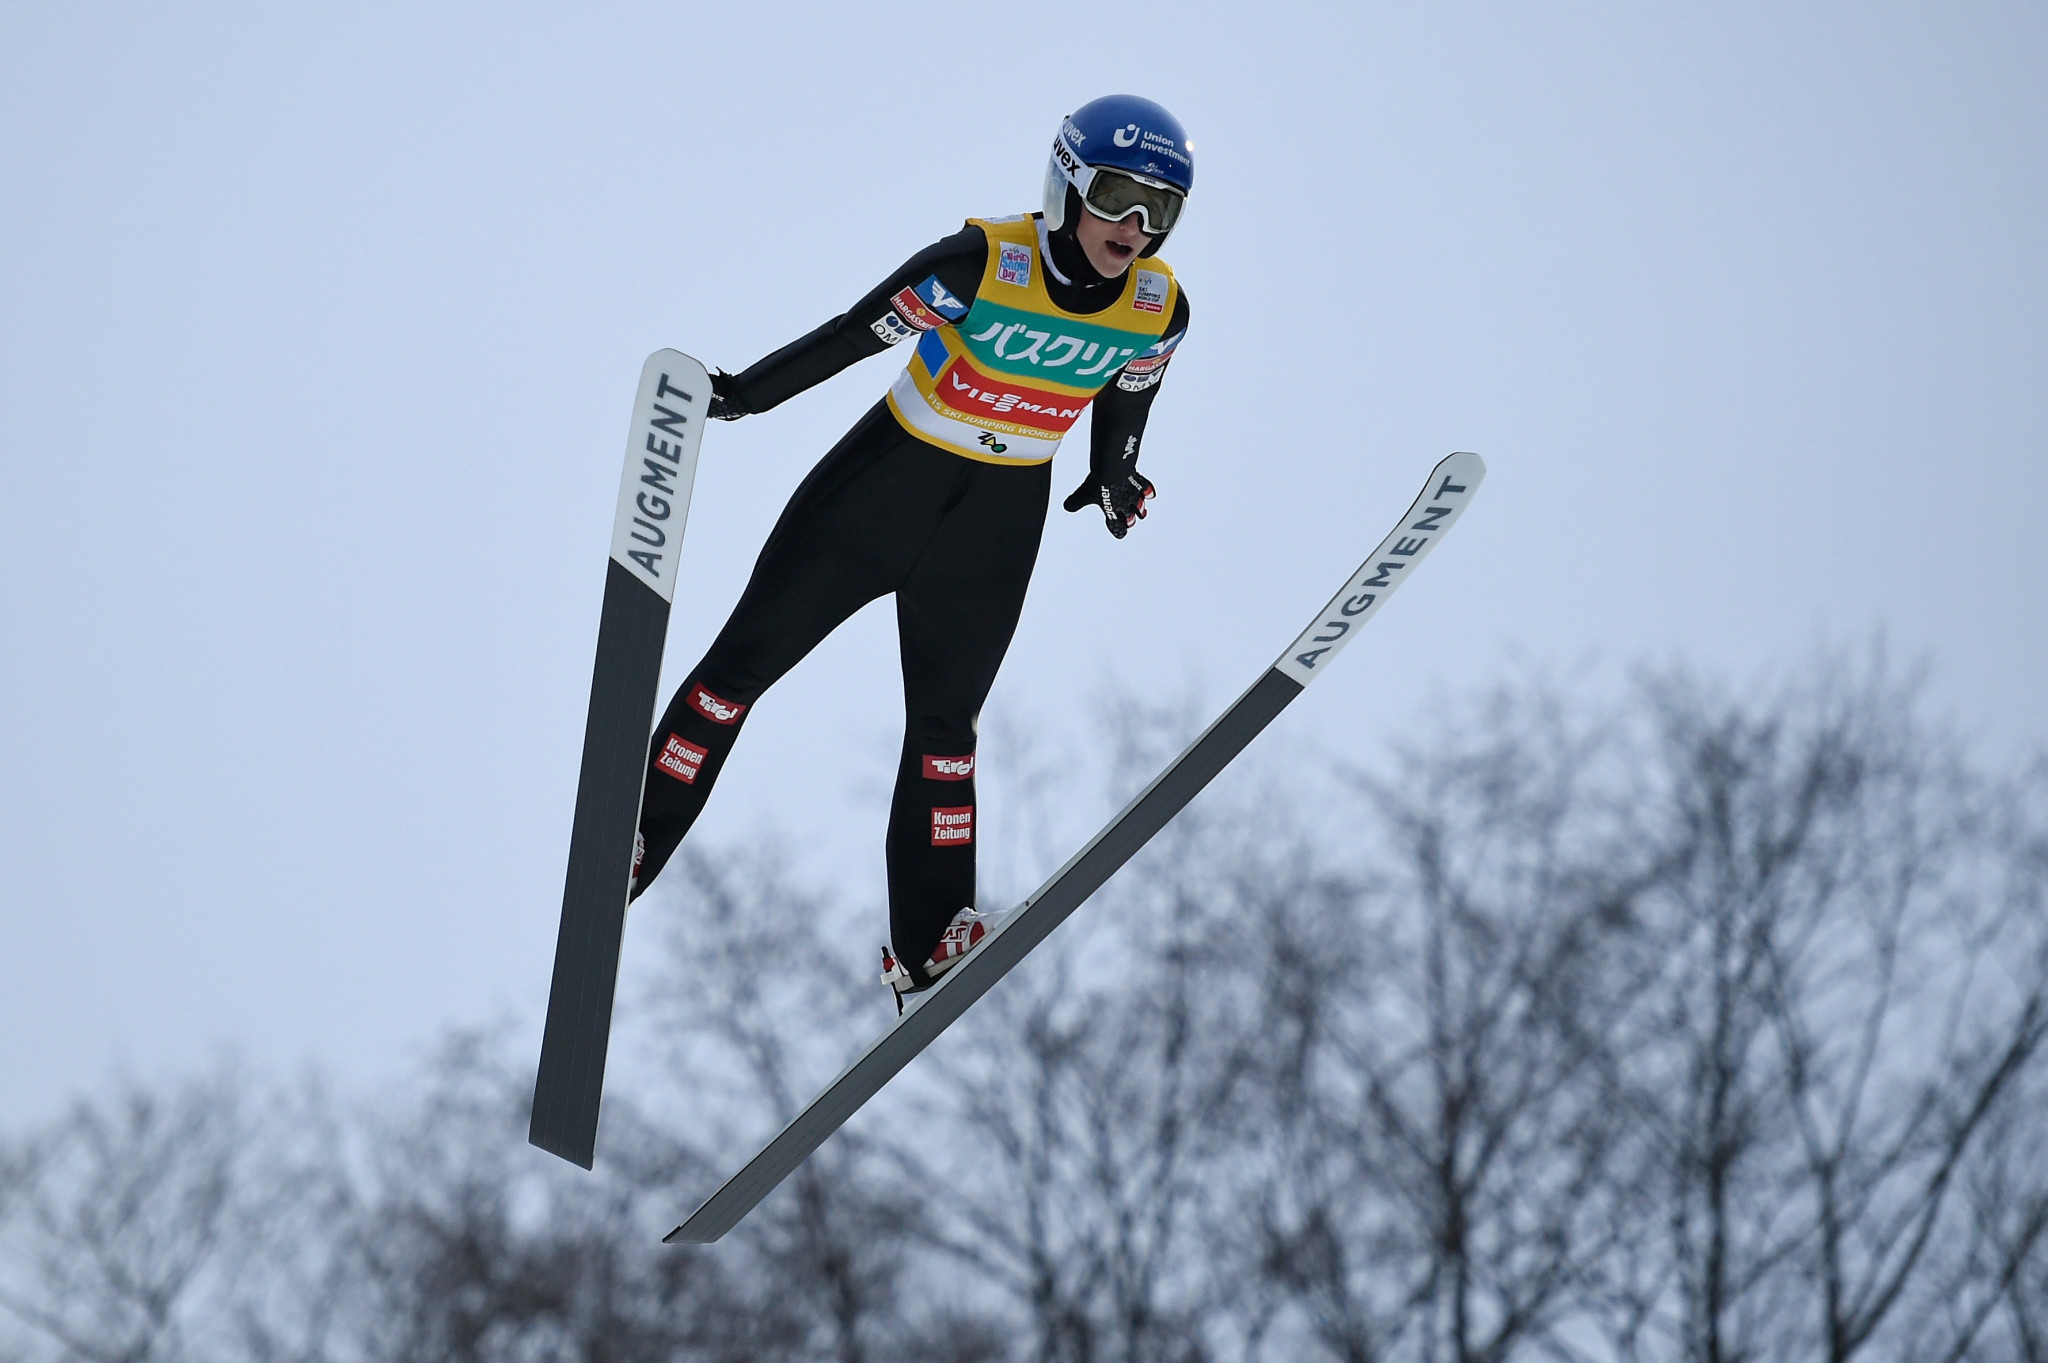 Individual winner Eva Pinkelnig helped Austria earn team gold today at the FIS Ski Jumping World Cup ©Getty Images